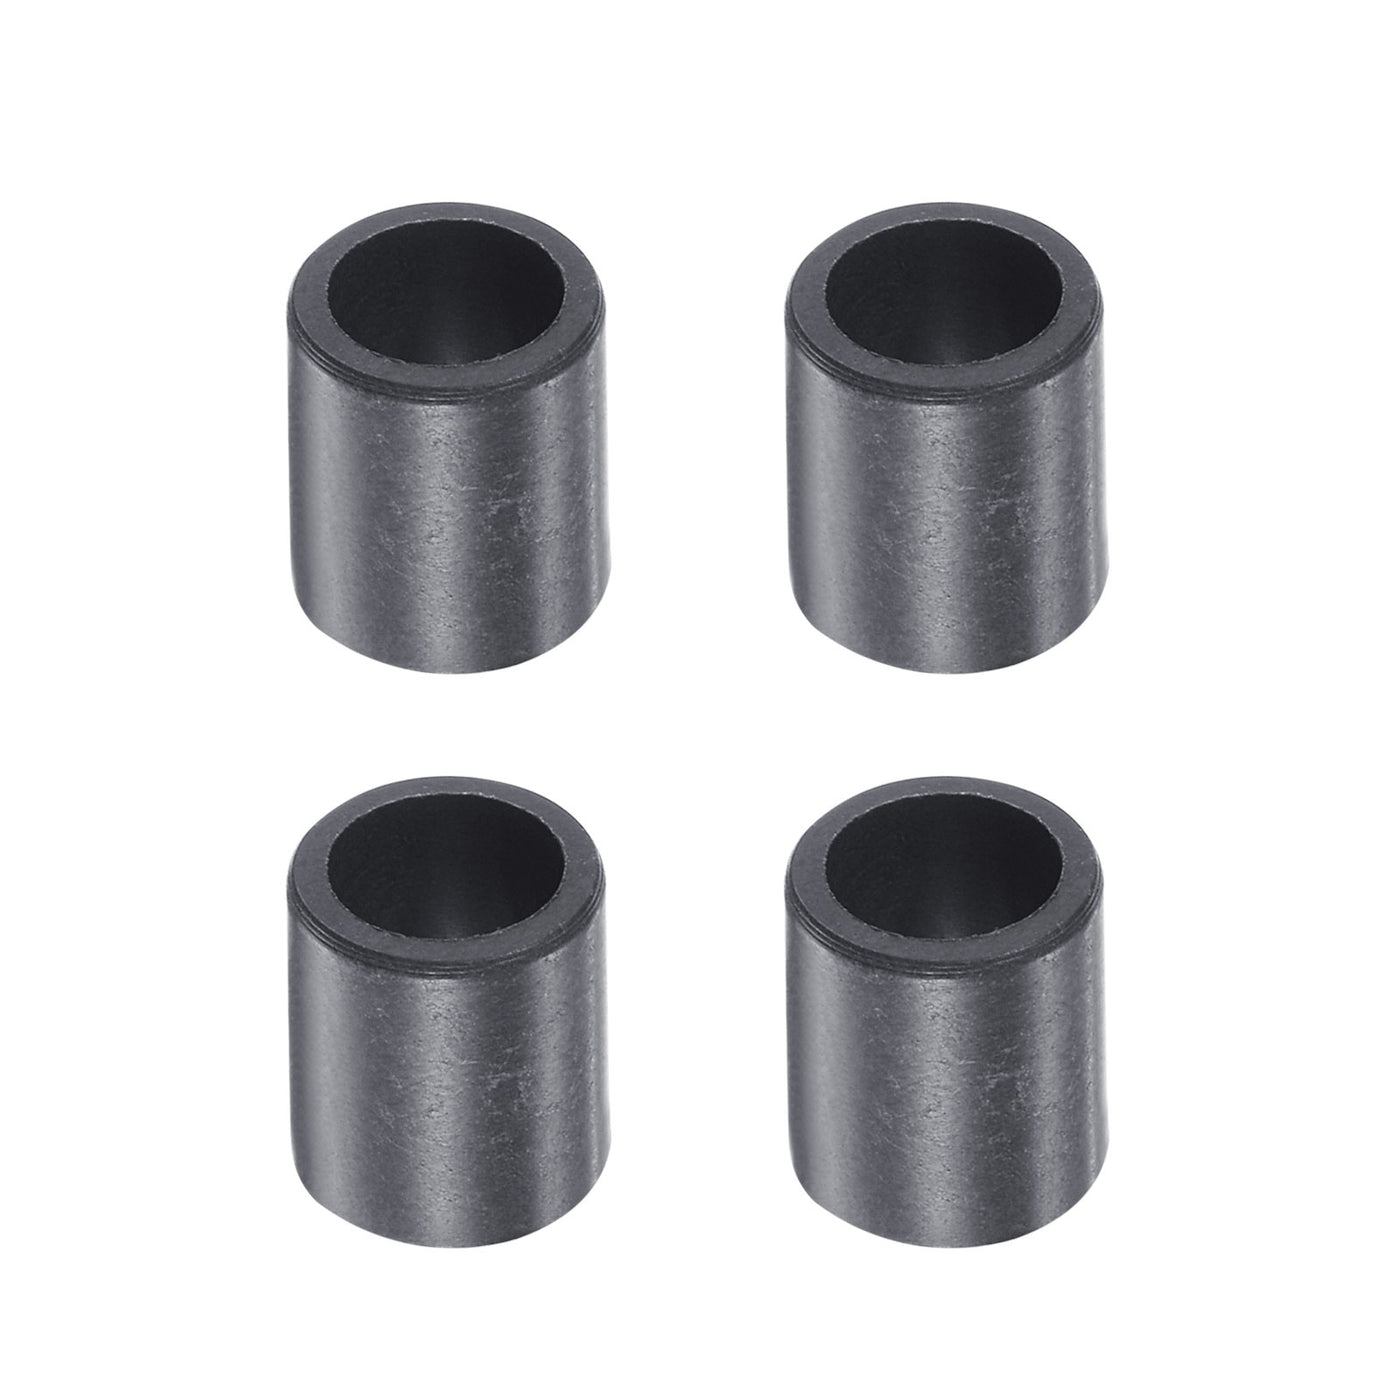 uxcell Uxcell Sleeve Bearings 5mmx7mmx8mm POM Wrapped Oilless Bushings Black 4pcs